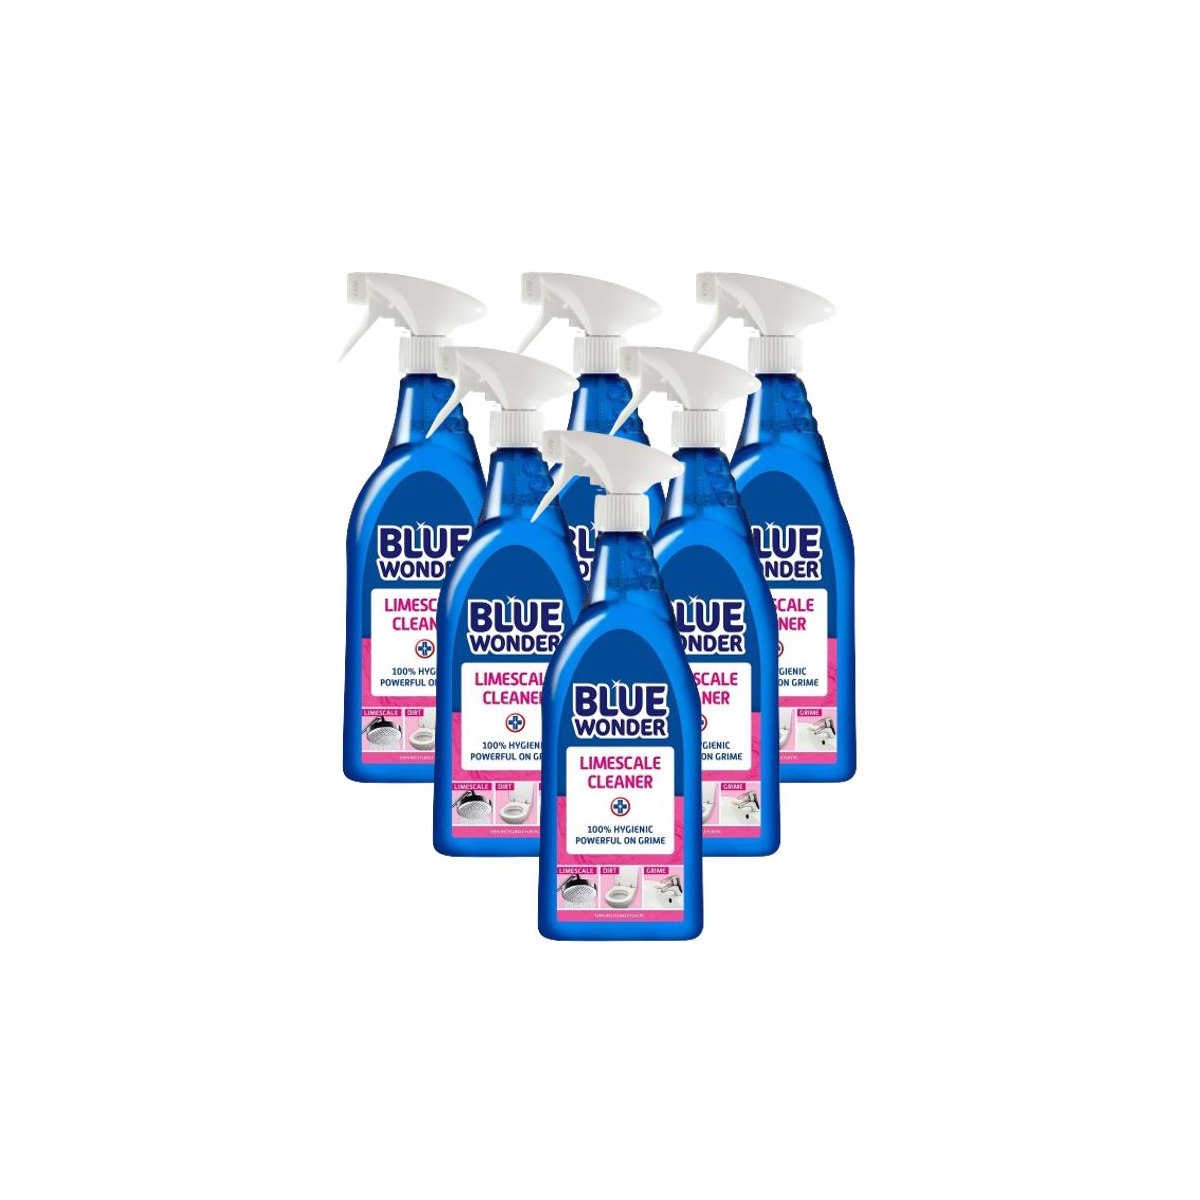 Case of 6 x Blue Wonder Limescale Cleaner 750ml